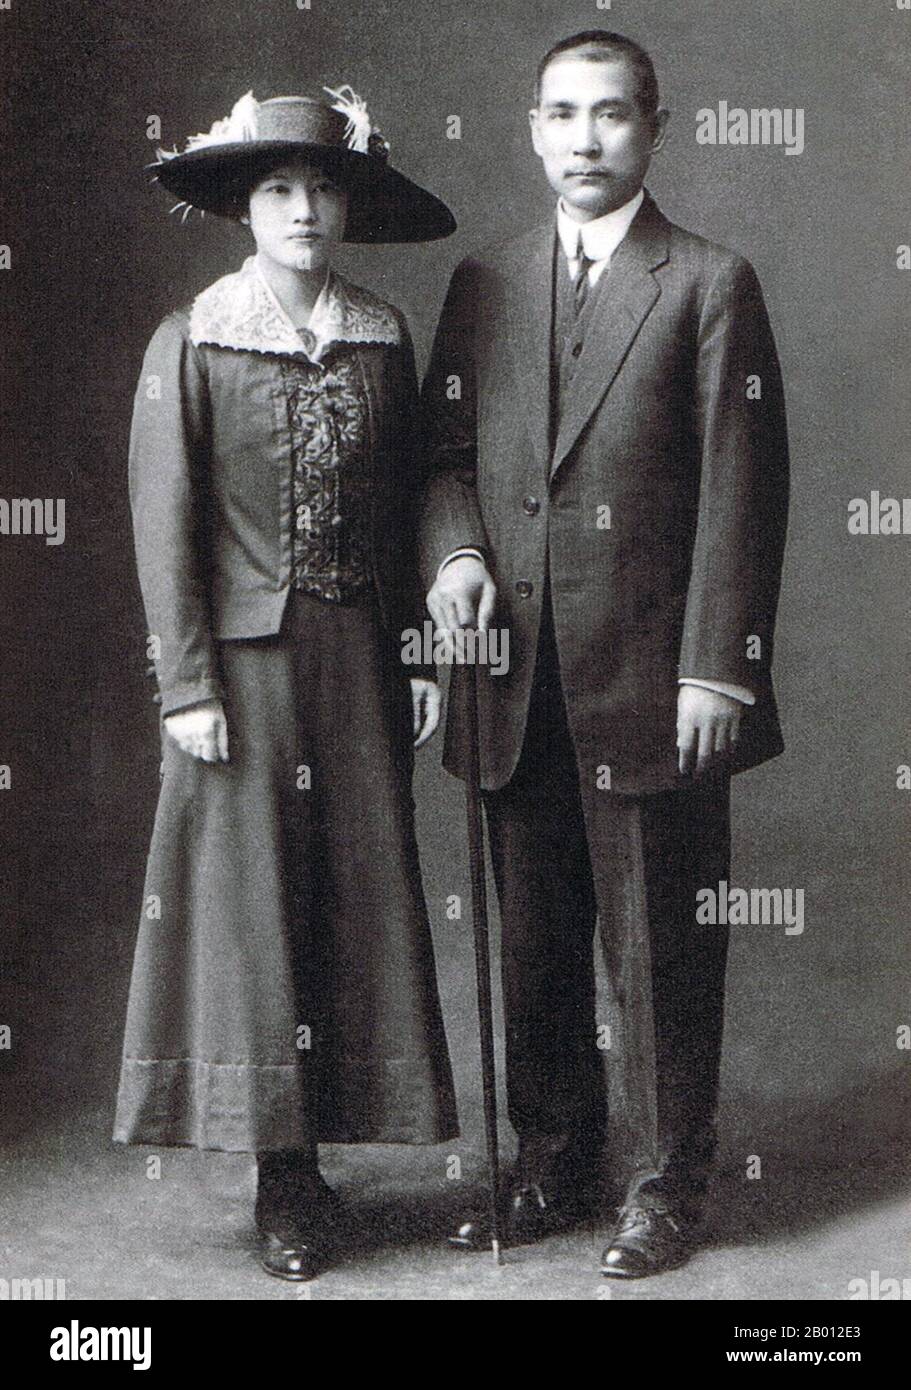 China: Song Qingling (1892-1981), first female Chairman and President of the People's Republic of China, together with her husband, Dr Sun Yat-sen (1866-1925), founder of the Chinese Republic (1912), wedding photo, 24 April 1916.  Sun Yat-sen (12 November 1866 – 12 March 1925) was a Chinese revolutionary and political leader. As the foremost pioneer of Nationalist China, Sun is frequently referred to as the Founding Father of Republican China.  Song Qingling (27 January 1893 – 29 May 1981), also known as Madame Sun Yat-sen, was one of the three Song sisters. Stock Photo